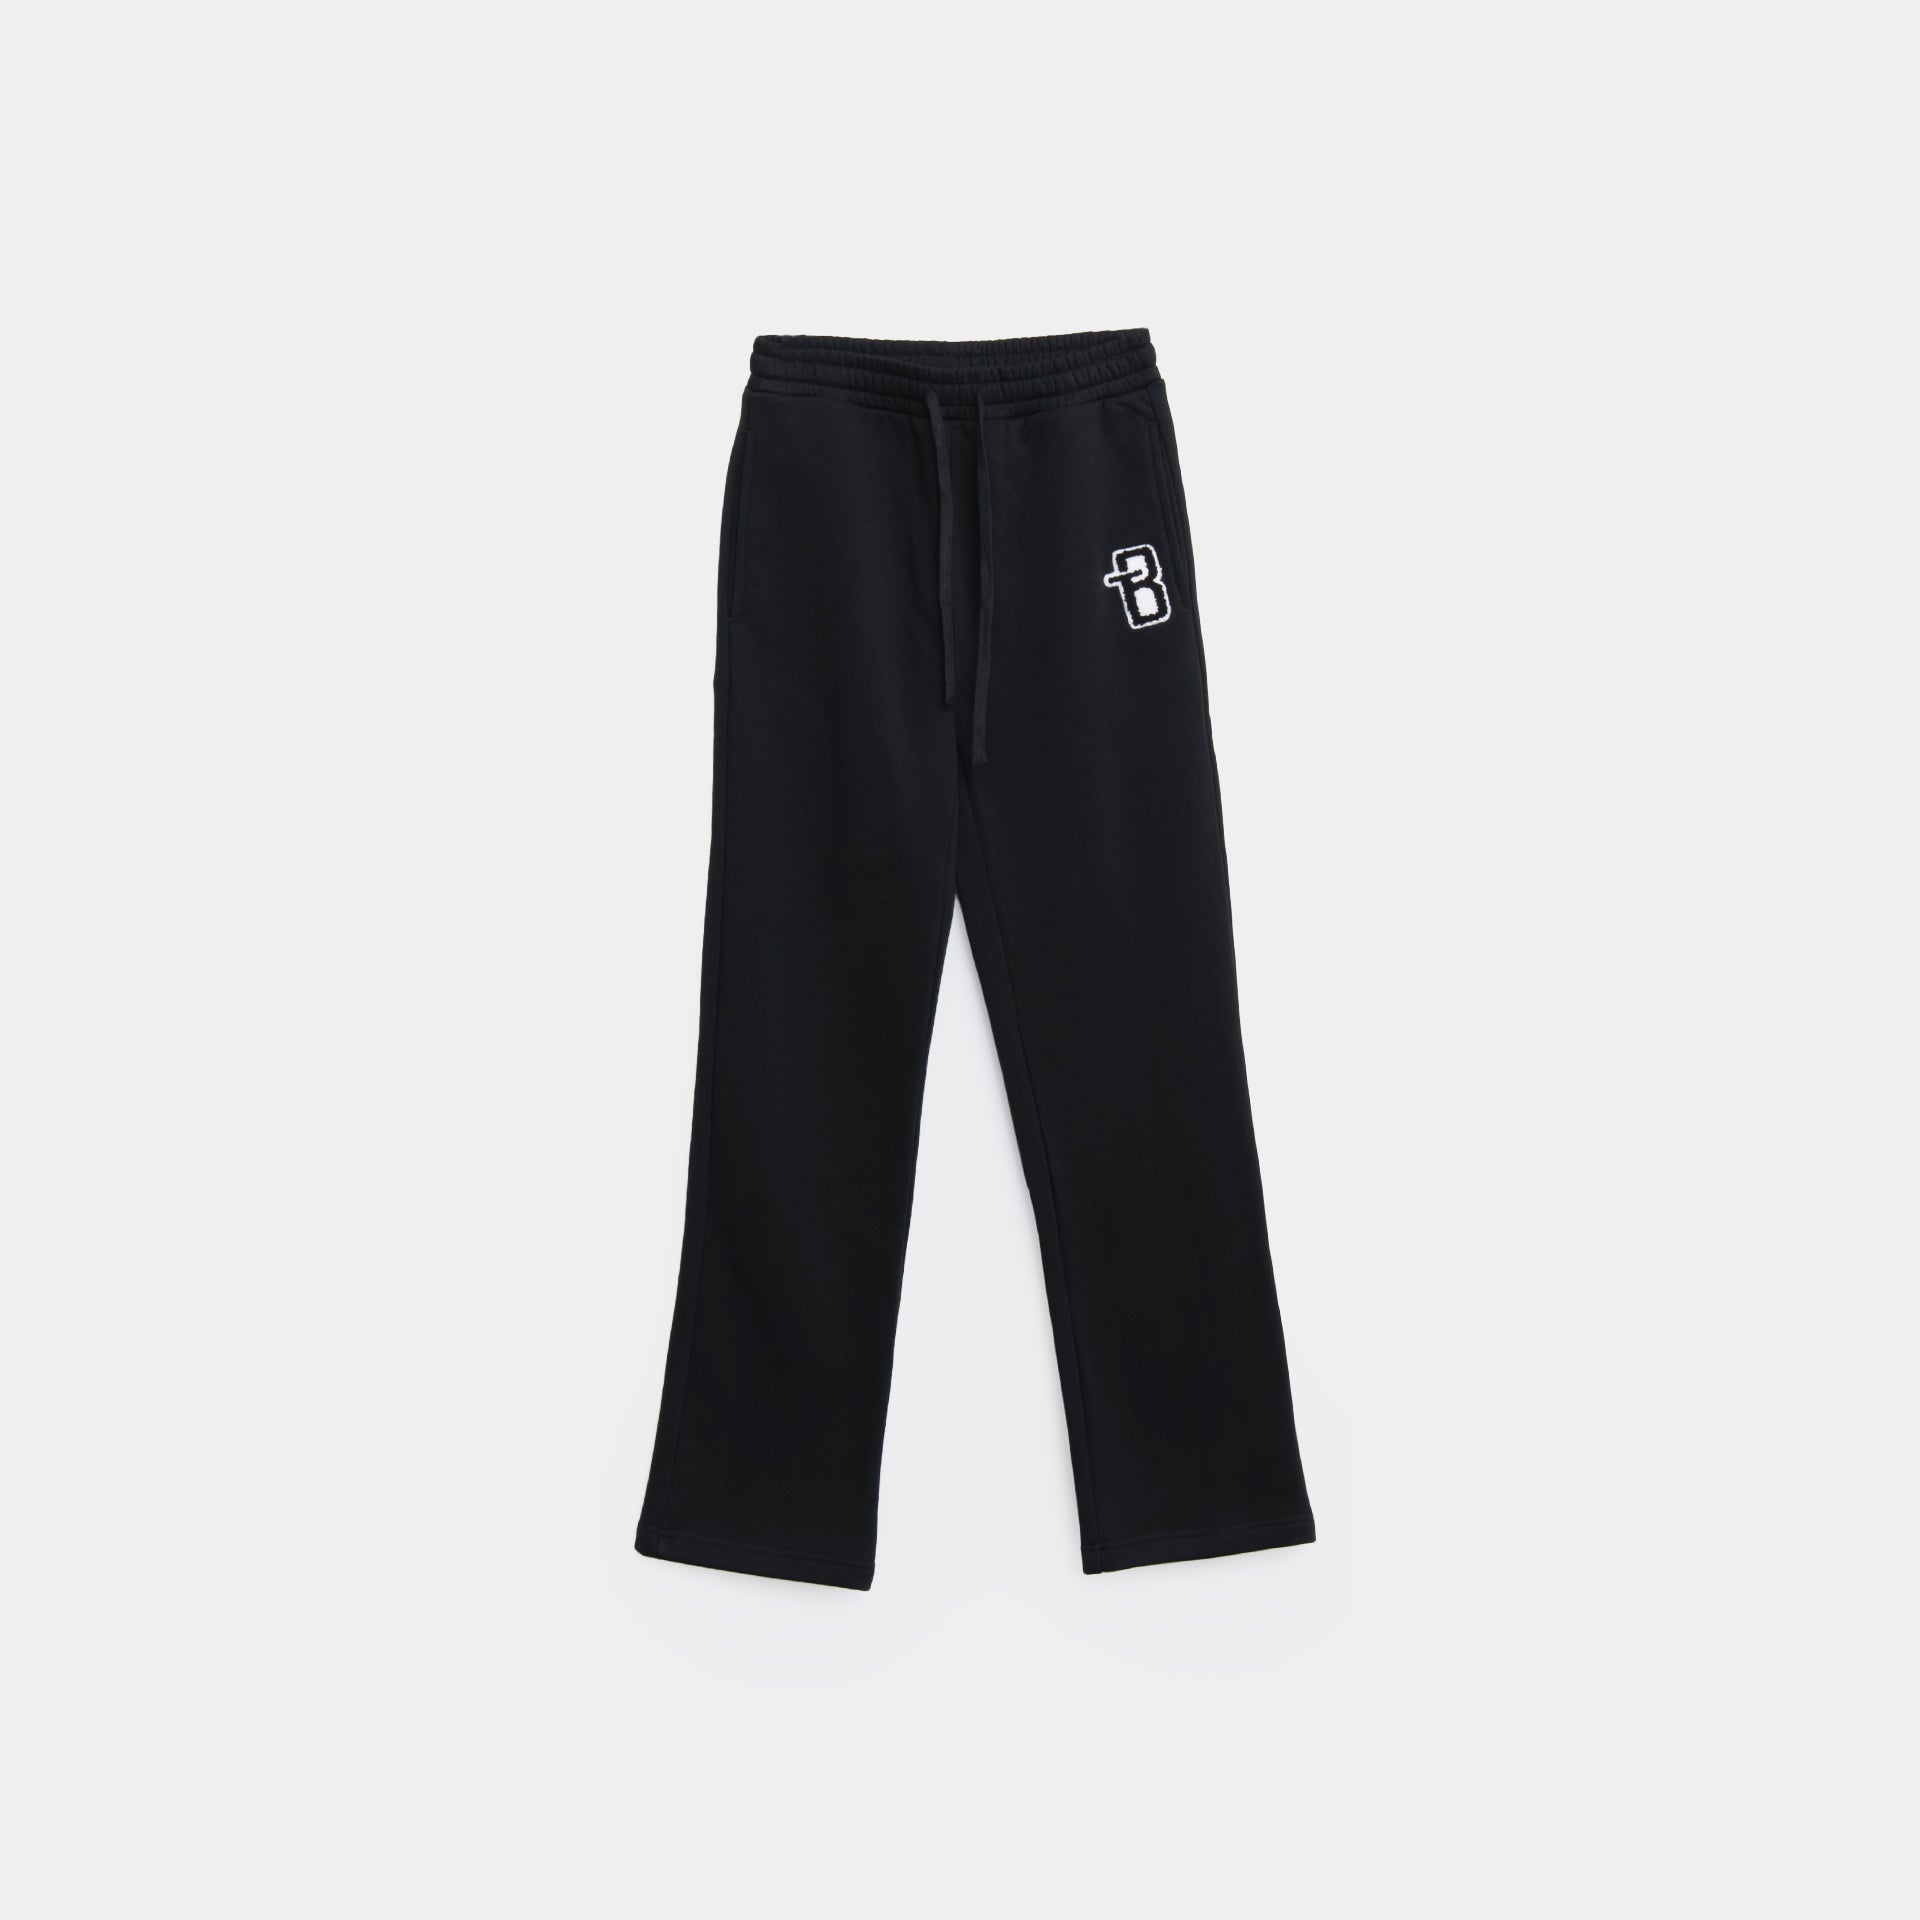 Black Sweater and Pant Set with BT Logo by Brandtionary